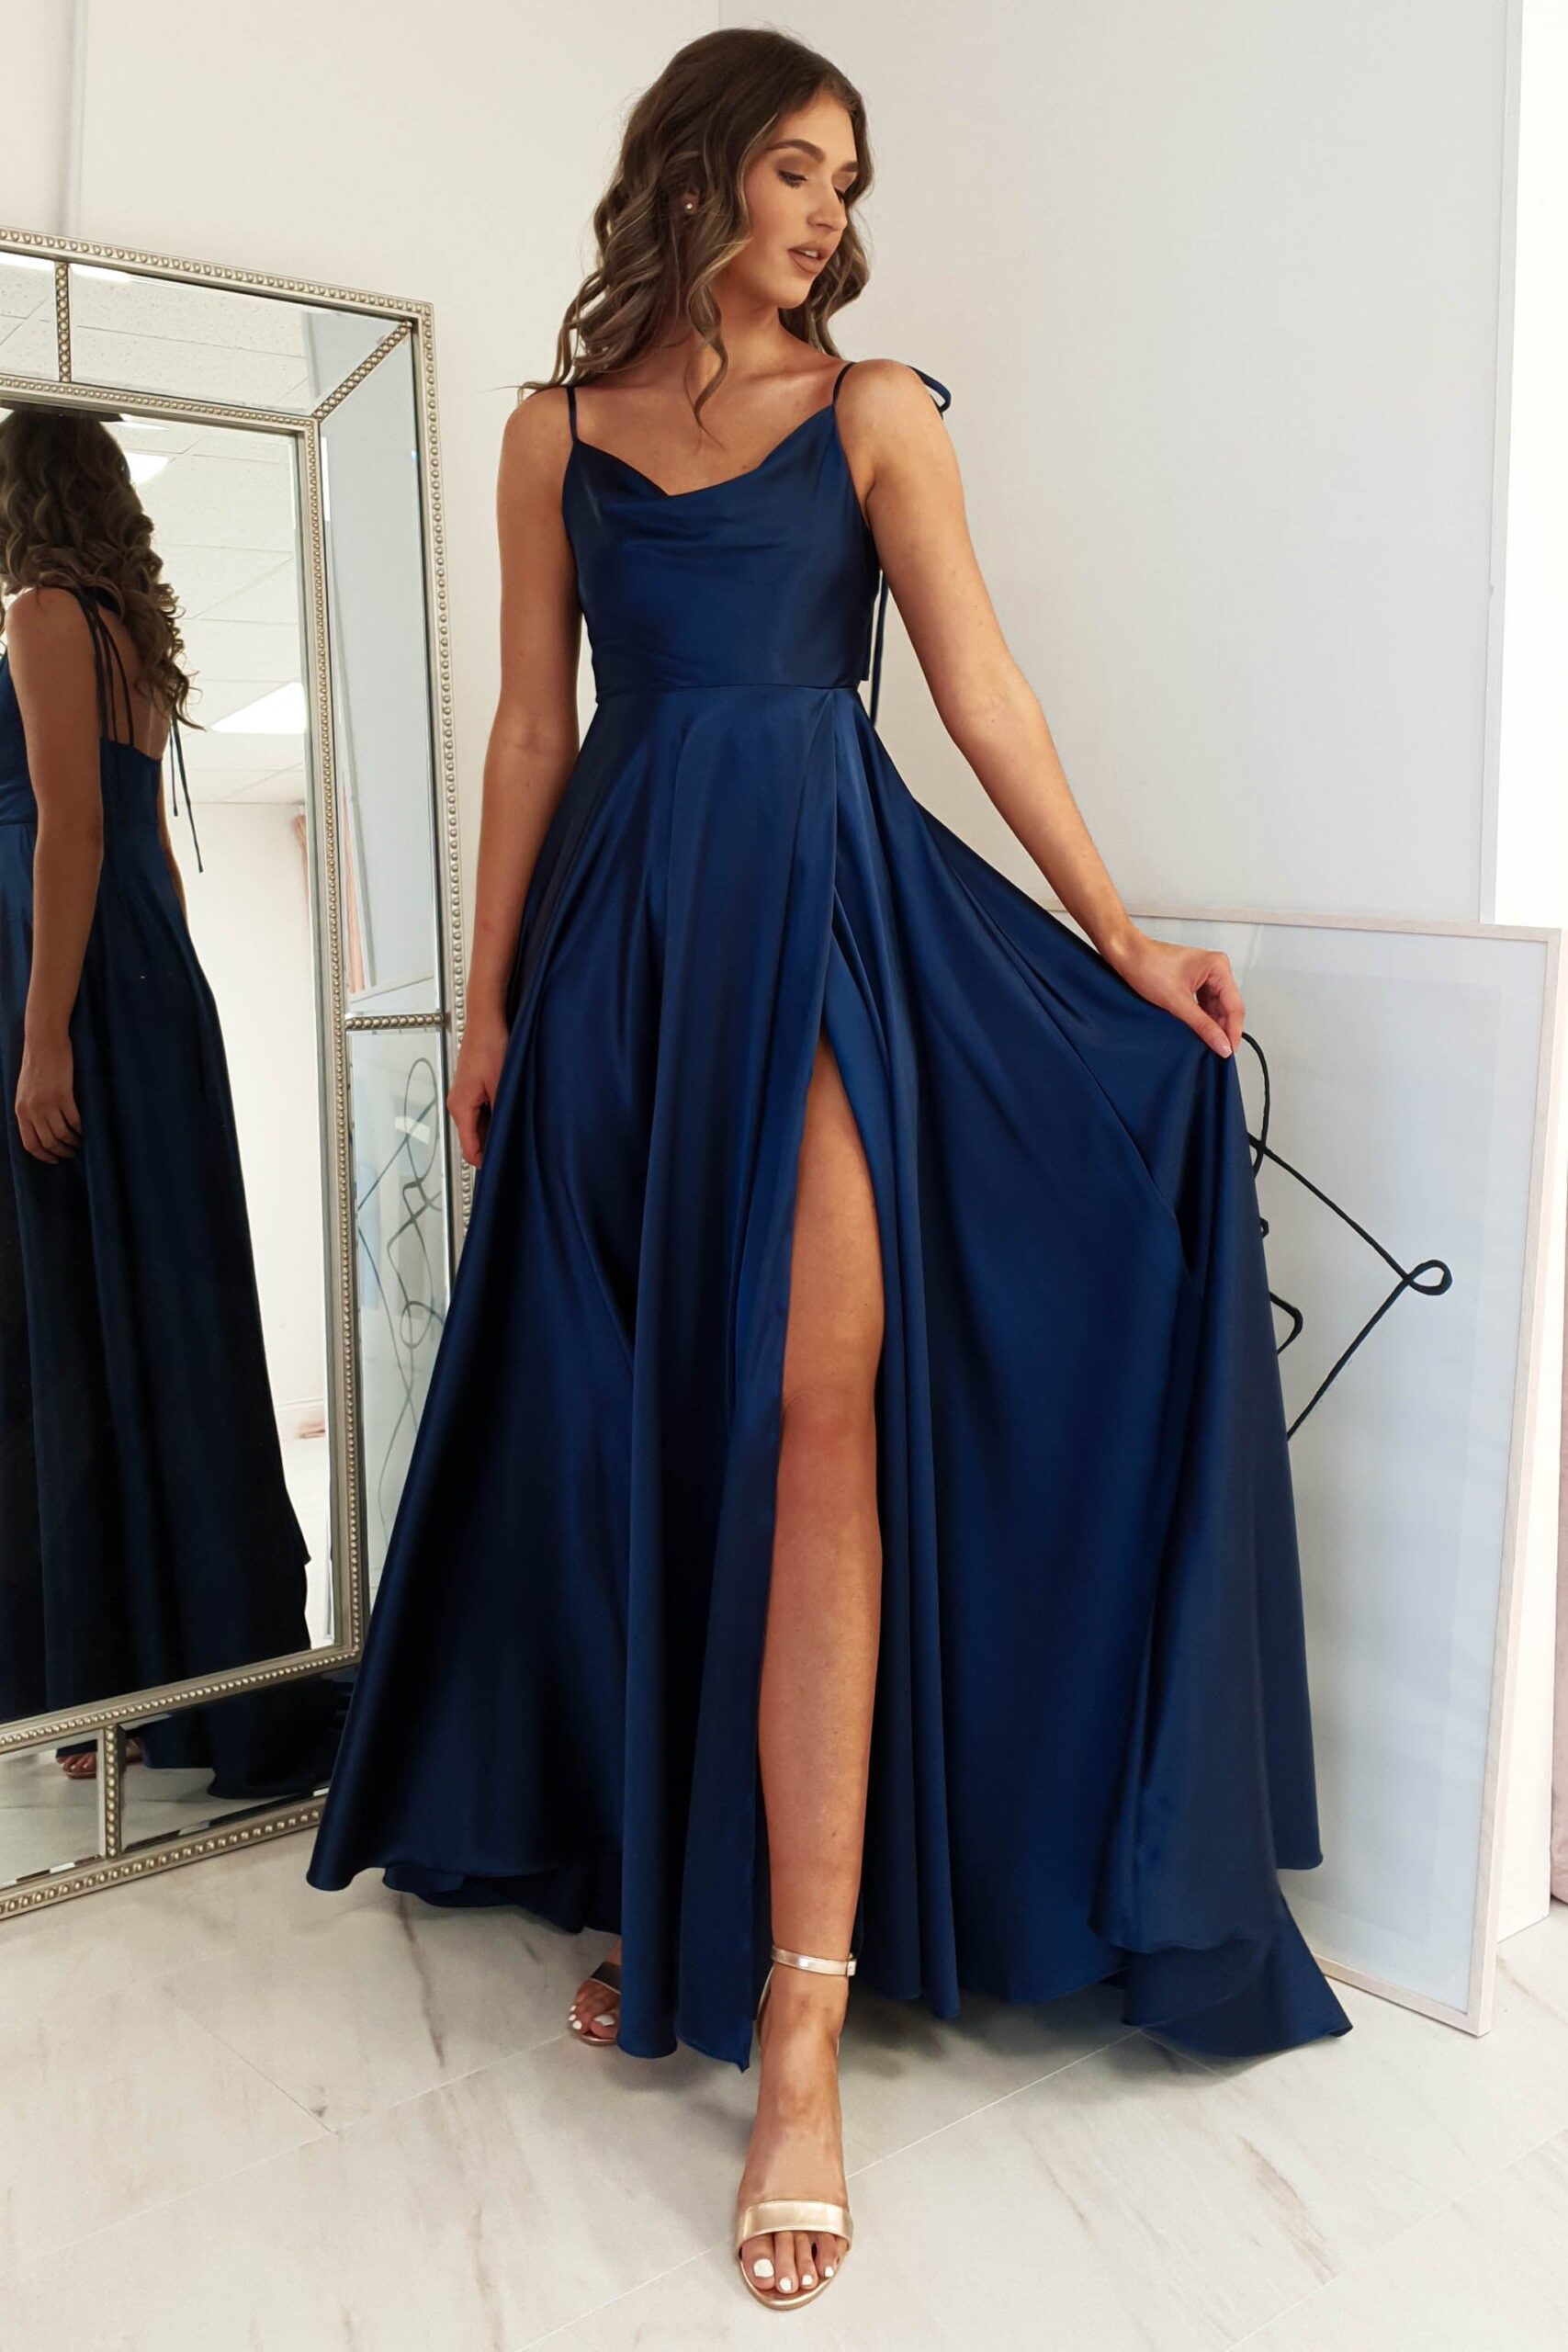 Picking navy dress for right occasion